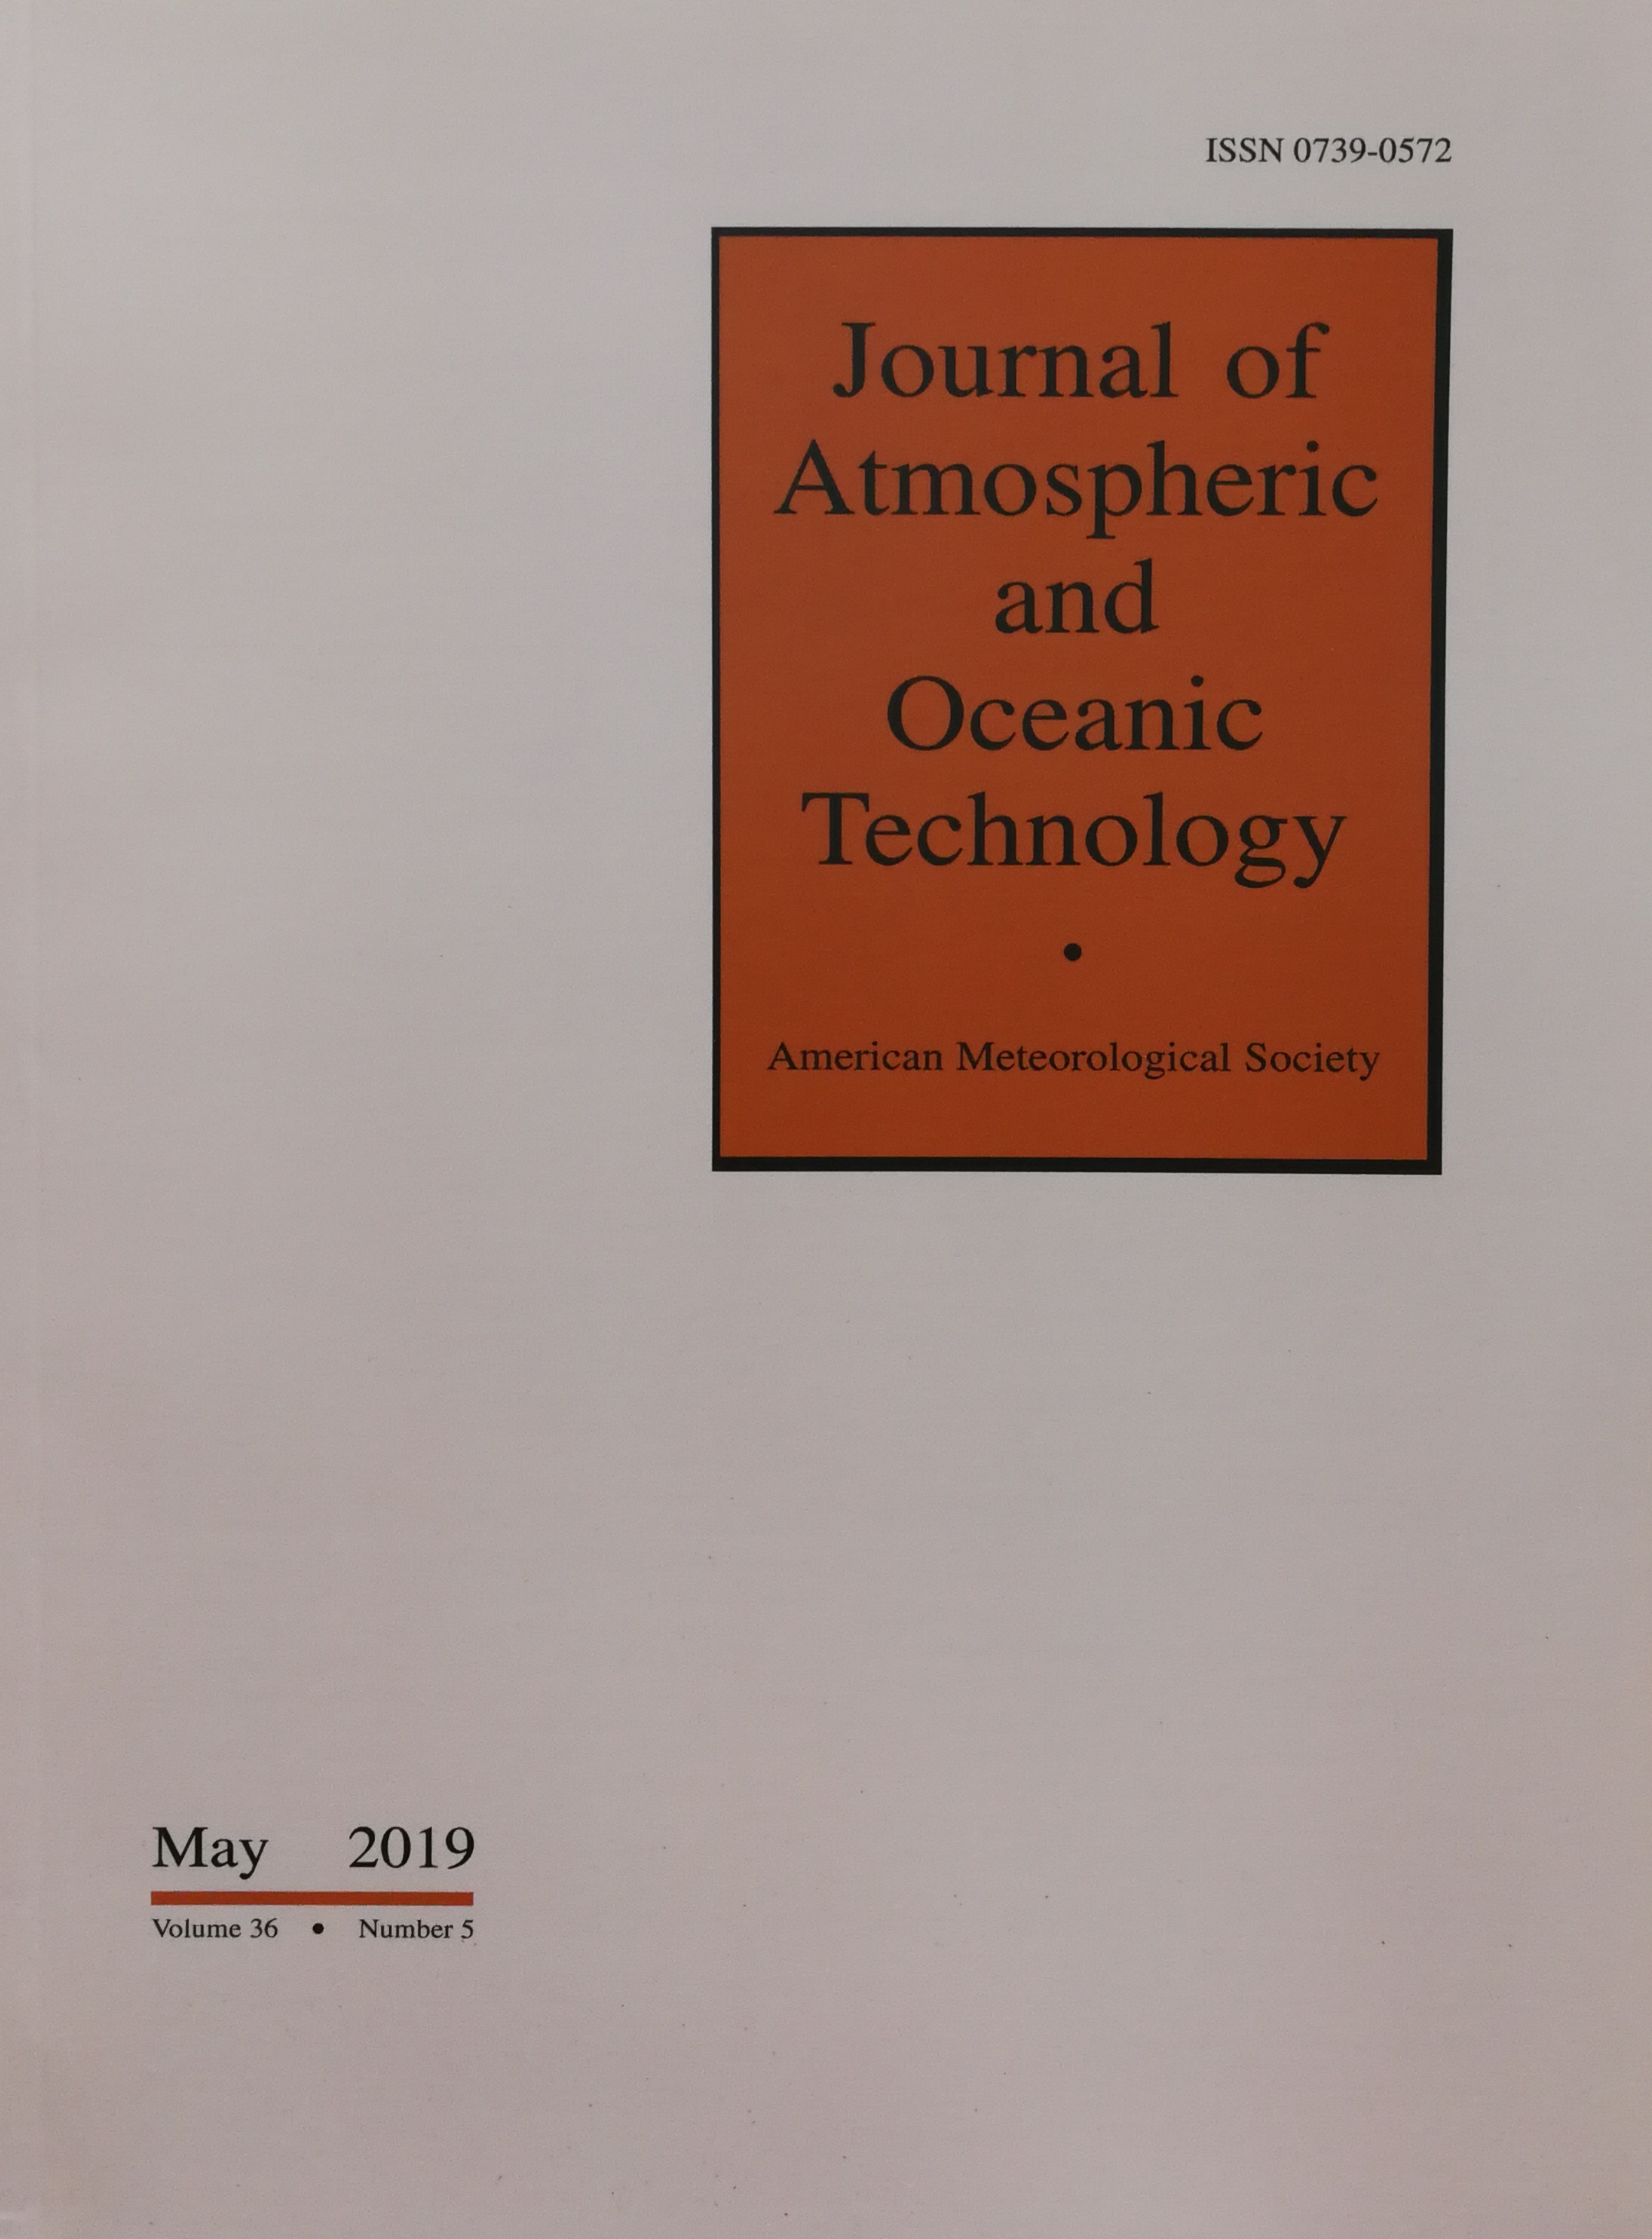 Journal of Atmospheric and Oceanic Technology